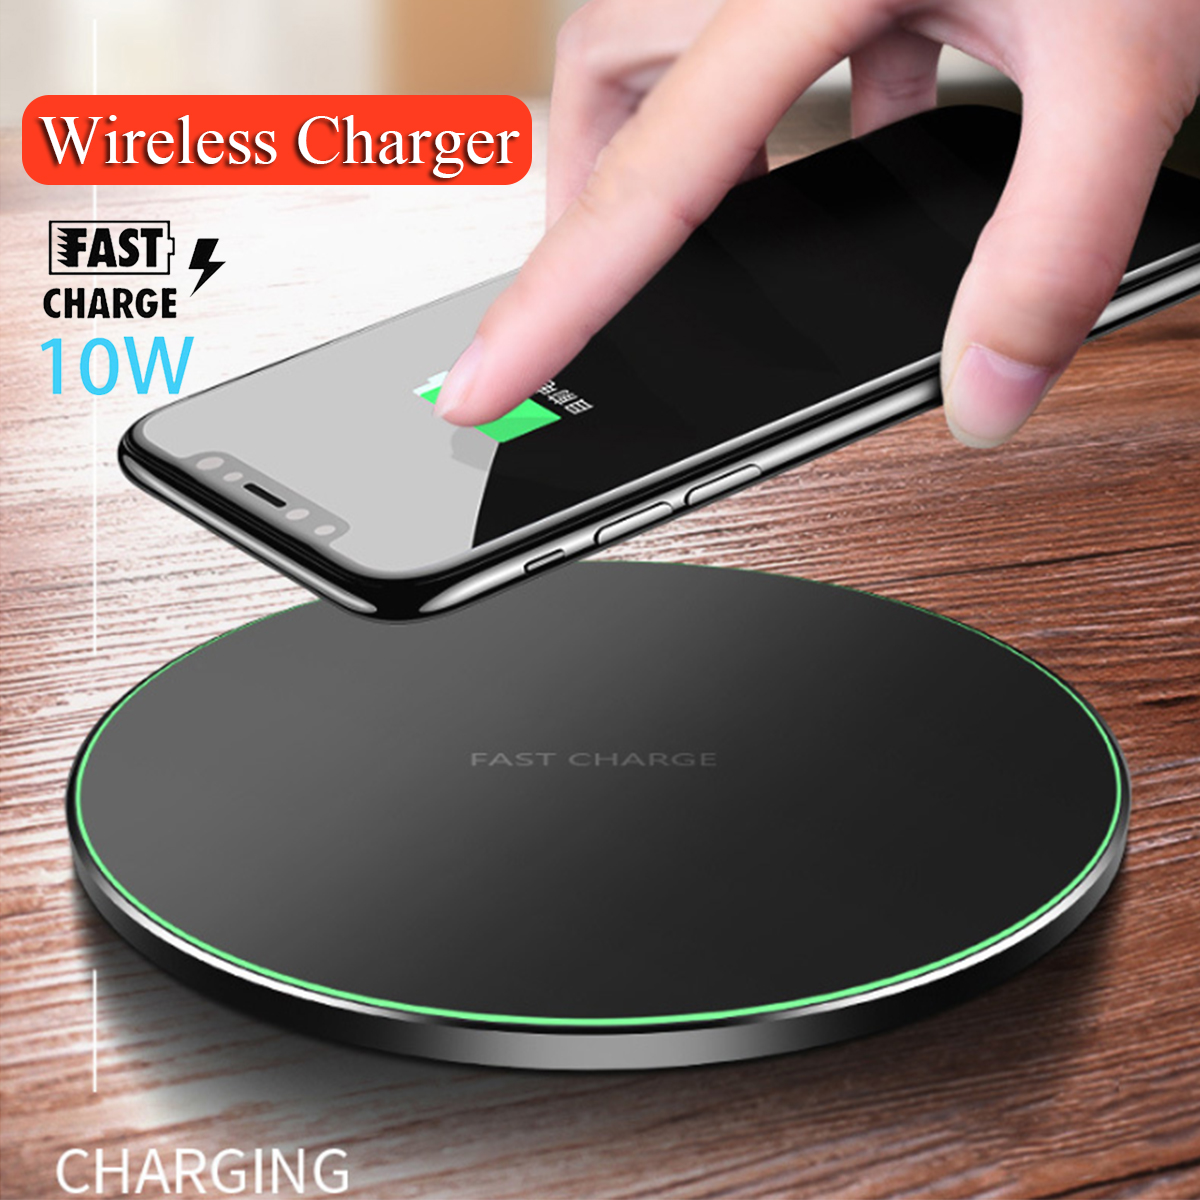 Bakeey-Aluminum-QI-Wireless-Fast-Charger-Charging-Dock-Pad-Mat-Phone-For-iPhone-XS-XR-X-1366096-8